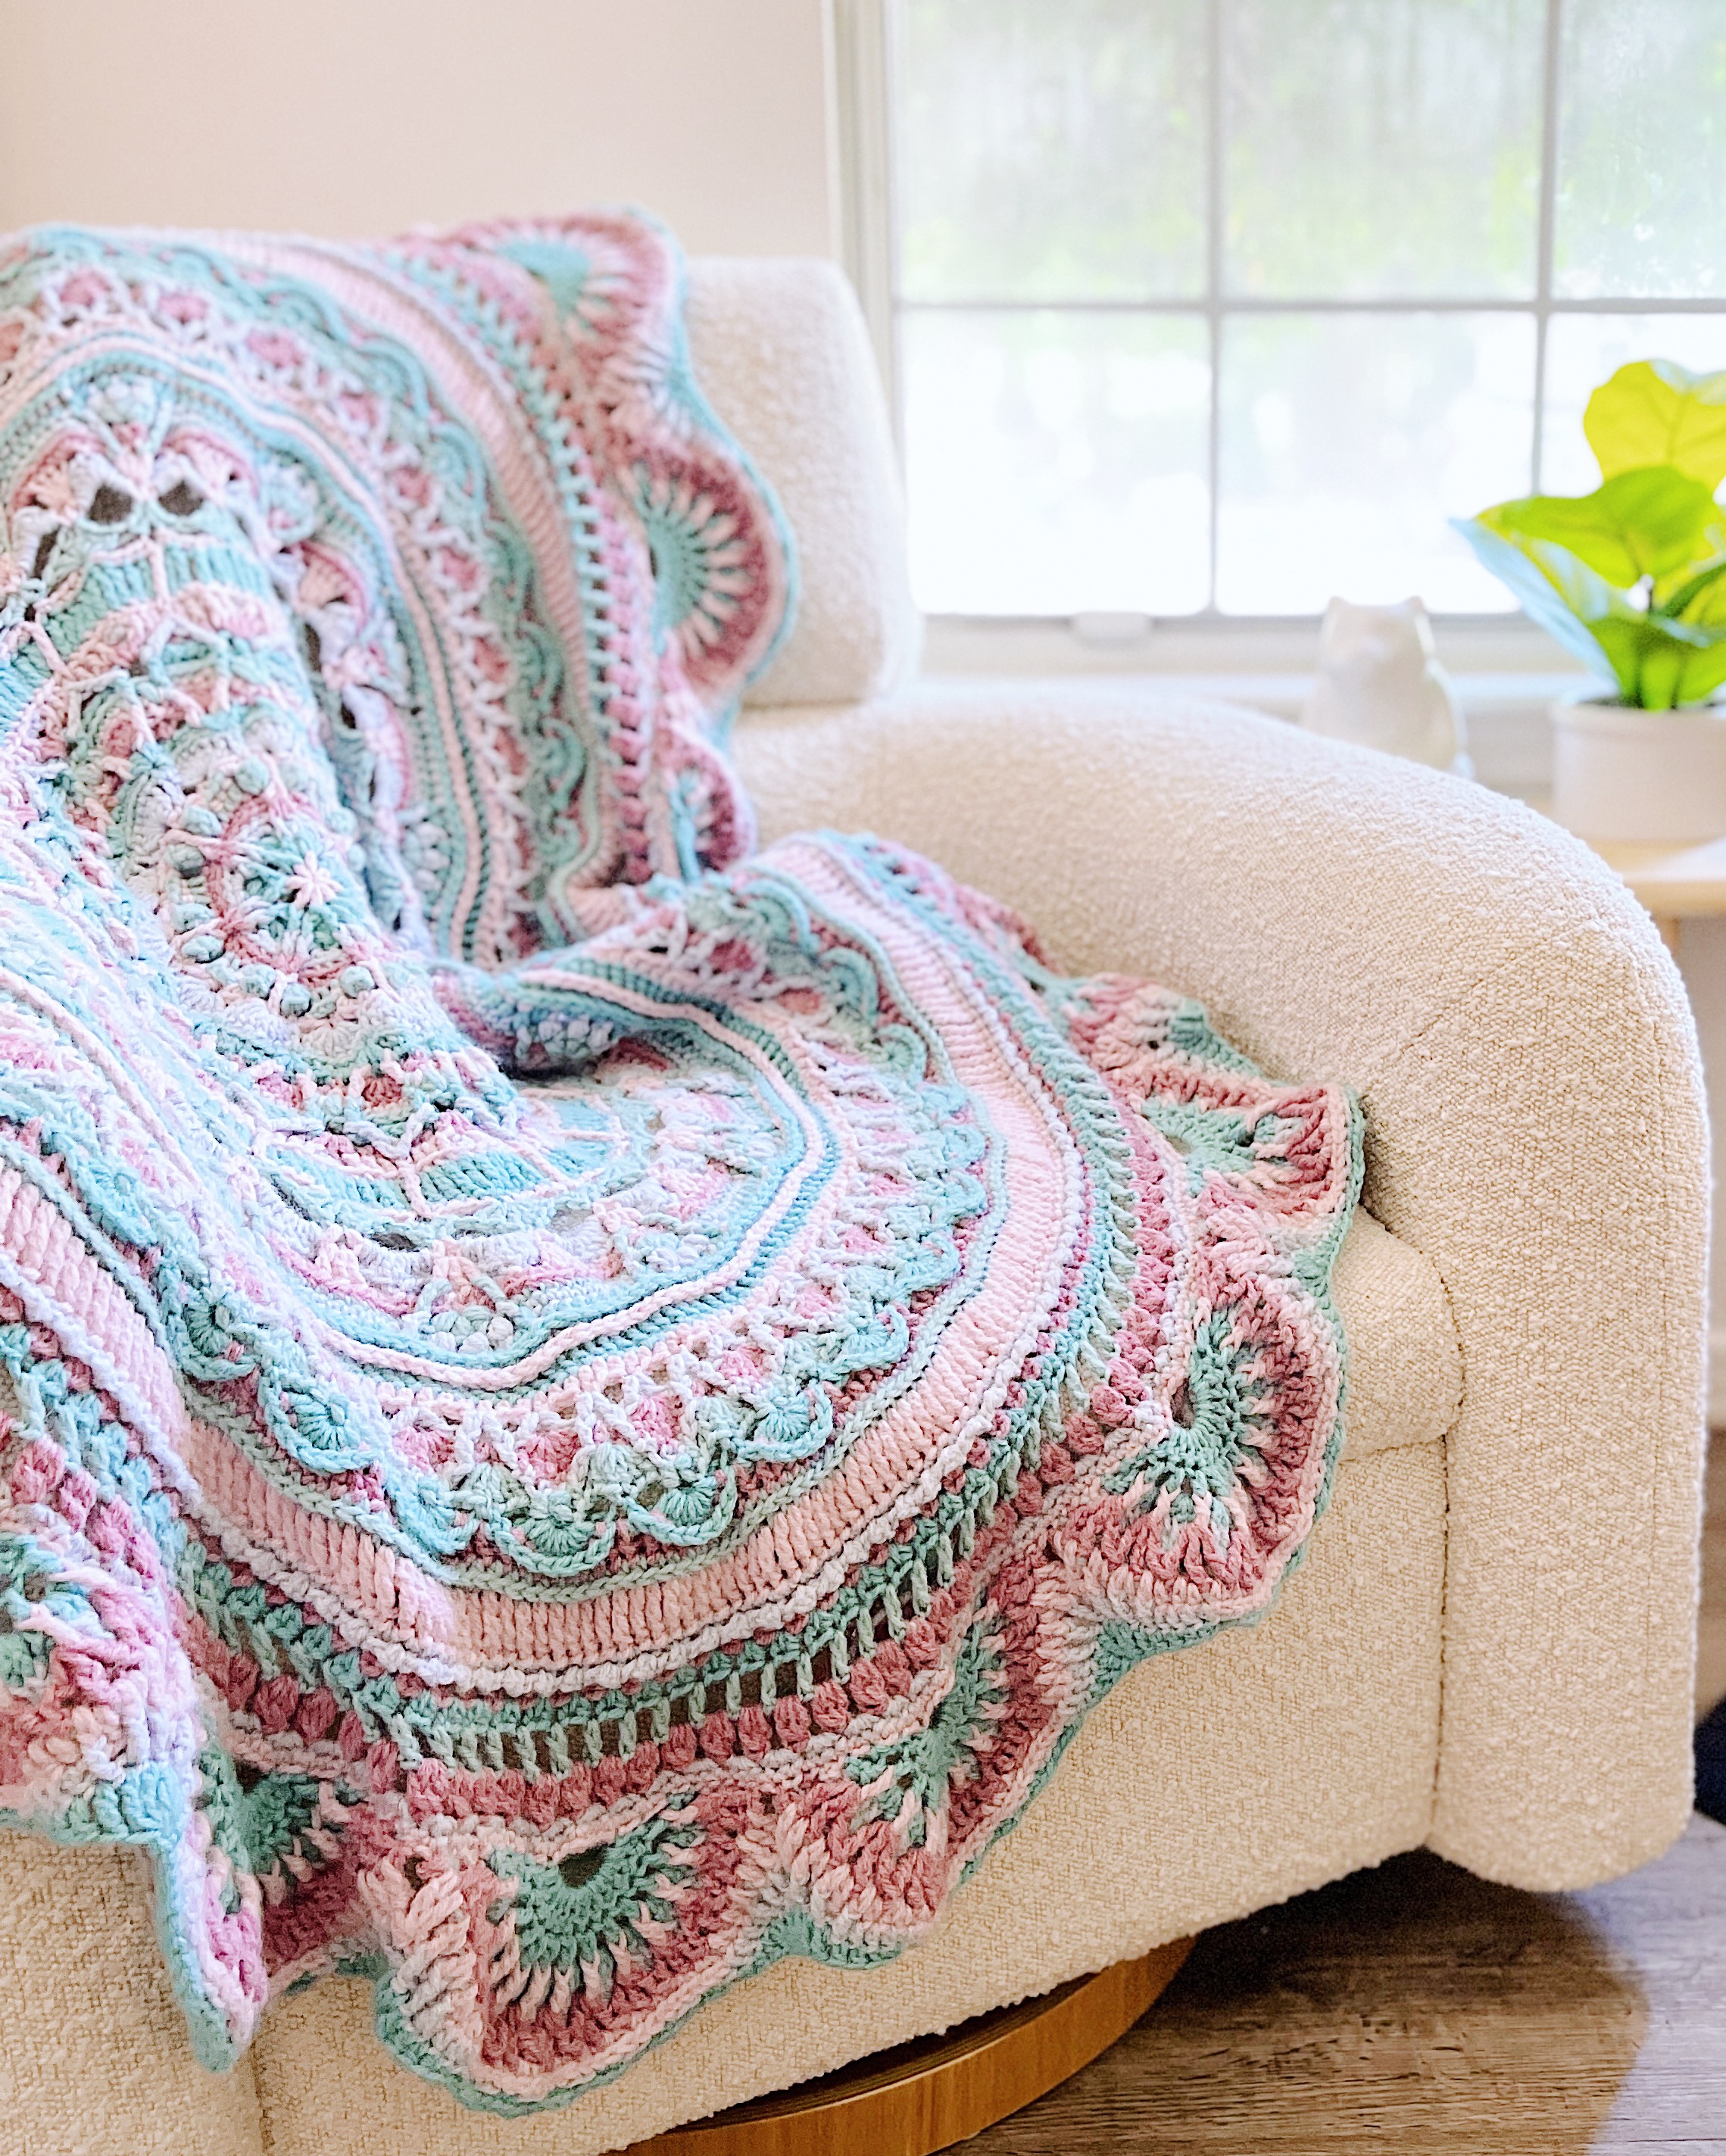 Top 21 crochet baby blanket patterns - Gathered